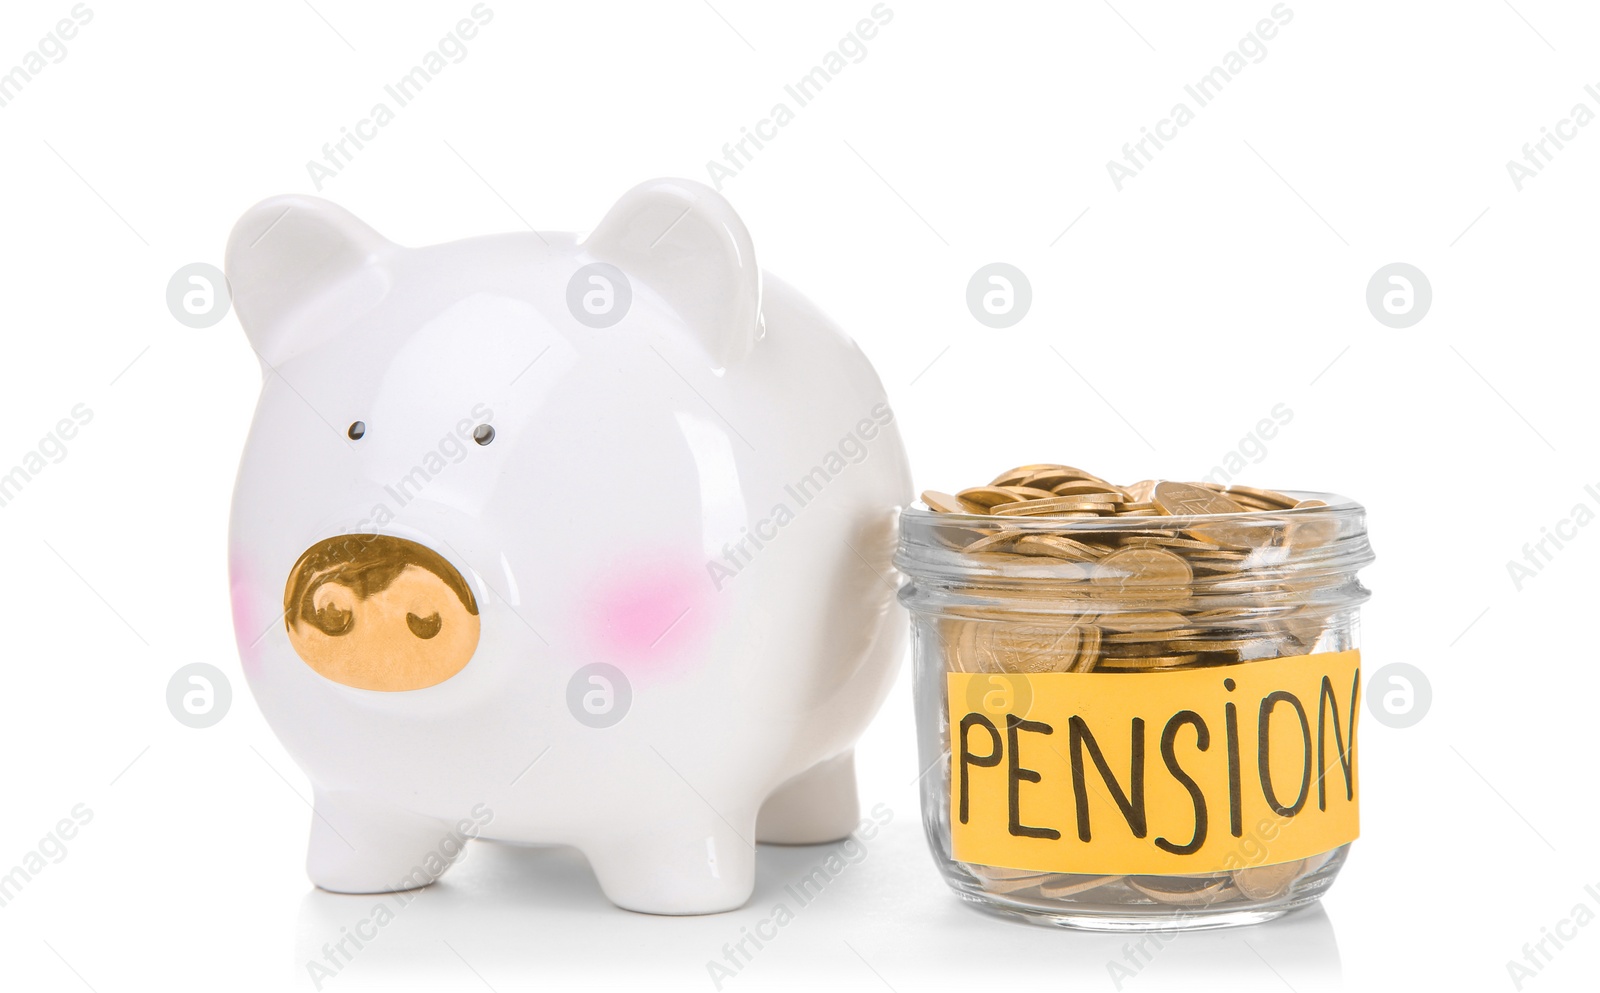 Photo of Piggy bank, glass jar with label "PENSION" and coins on white background